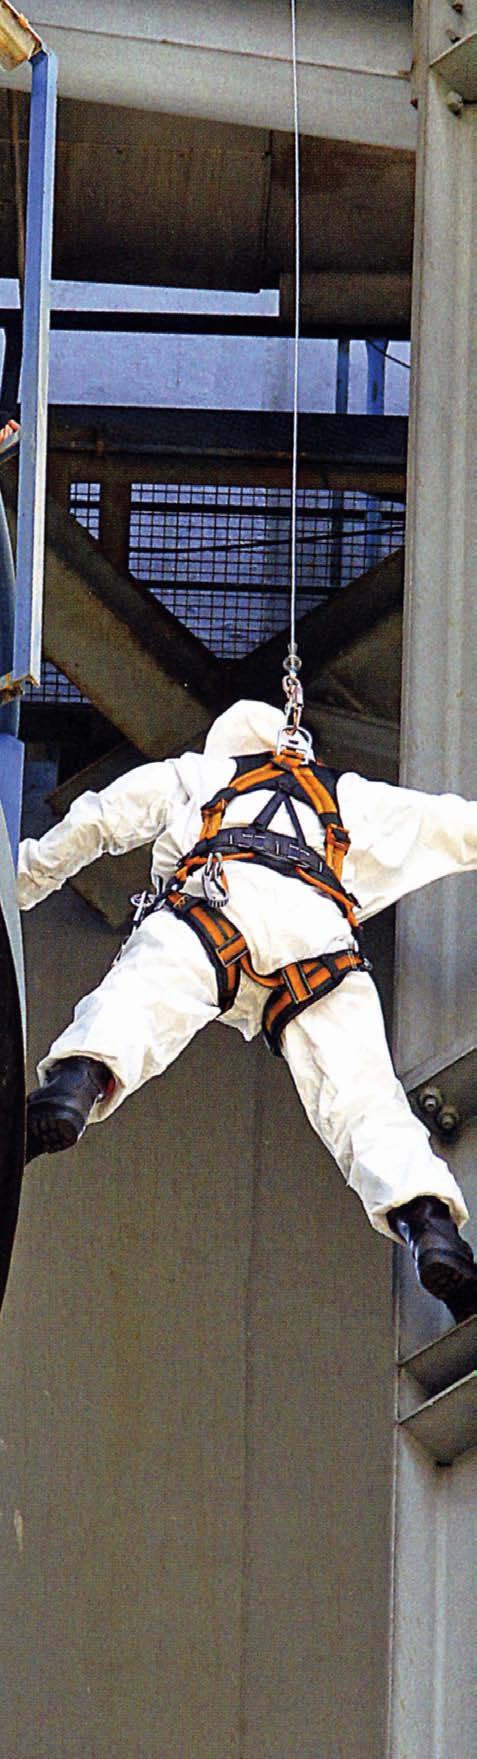 Ultimate (Rescue) Full Body Safety Harness Fall arrest - Work